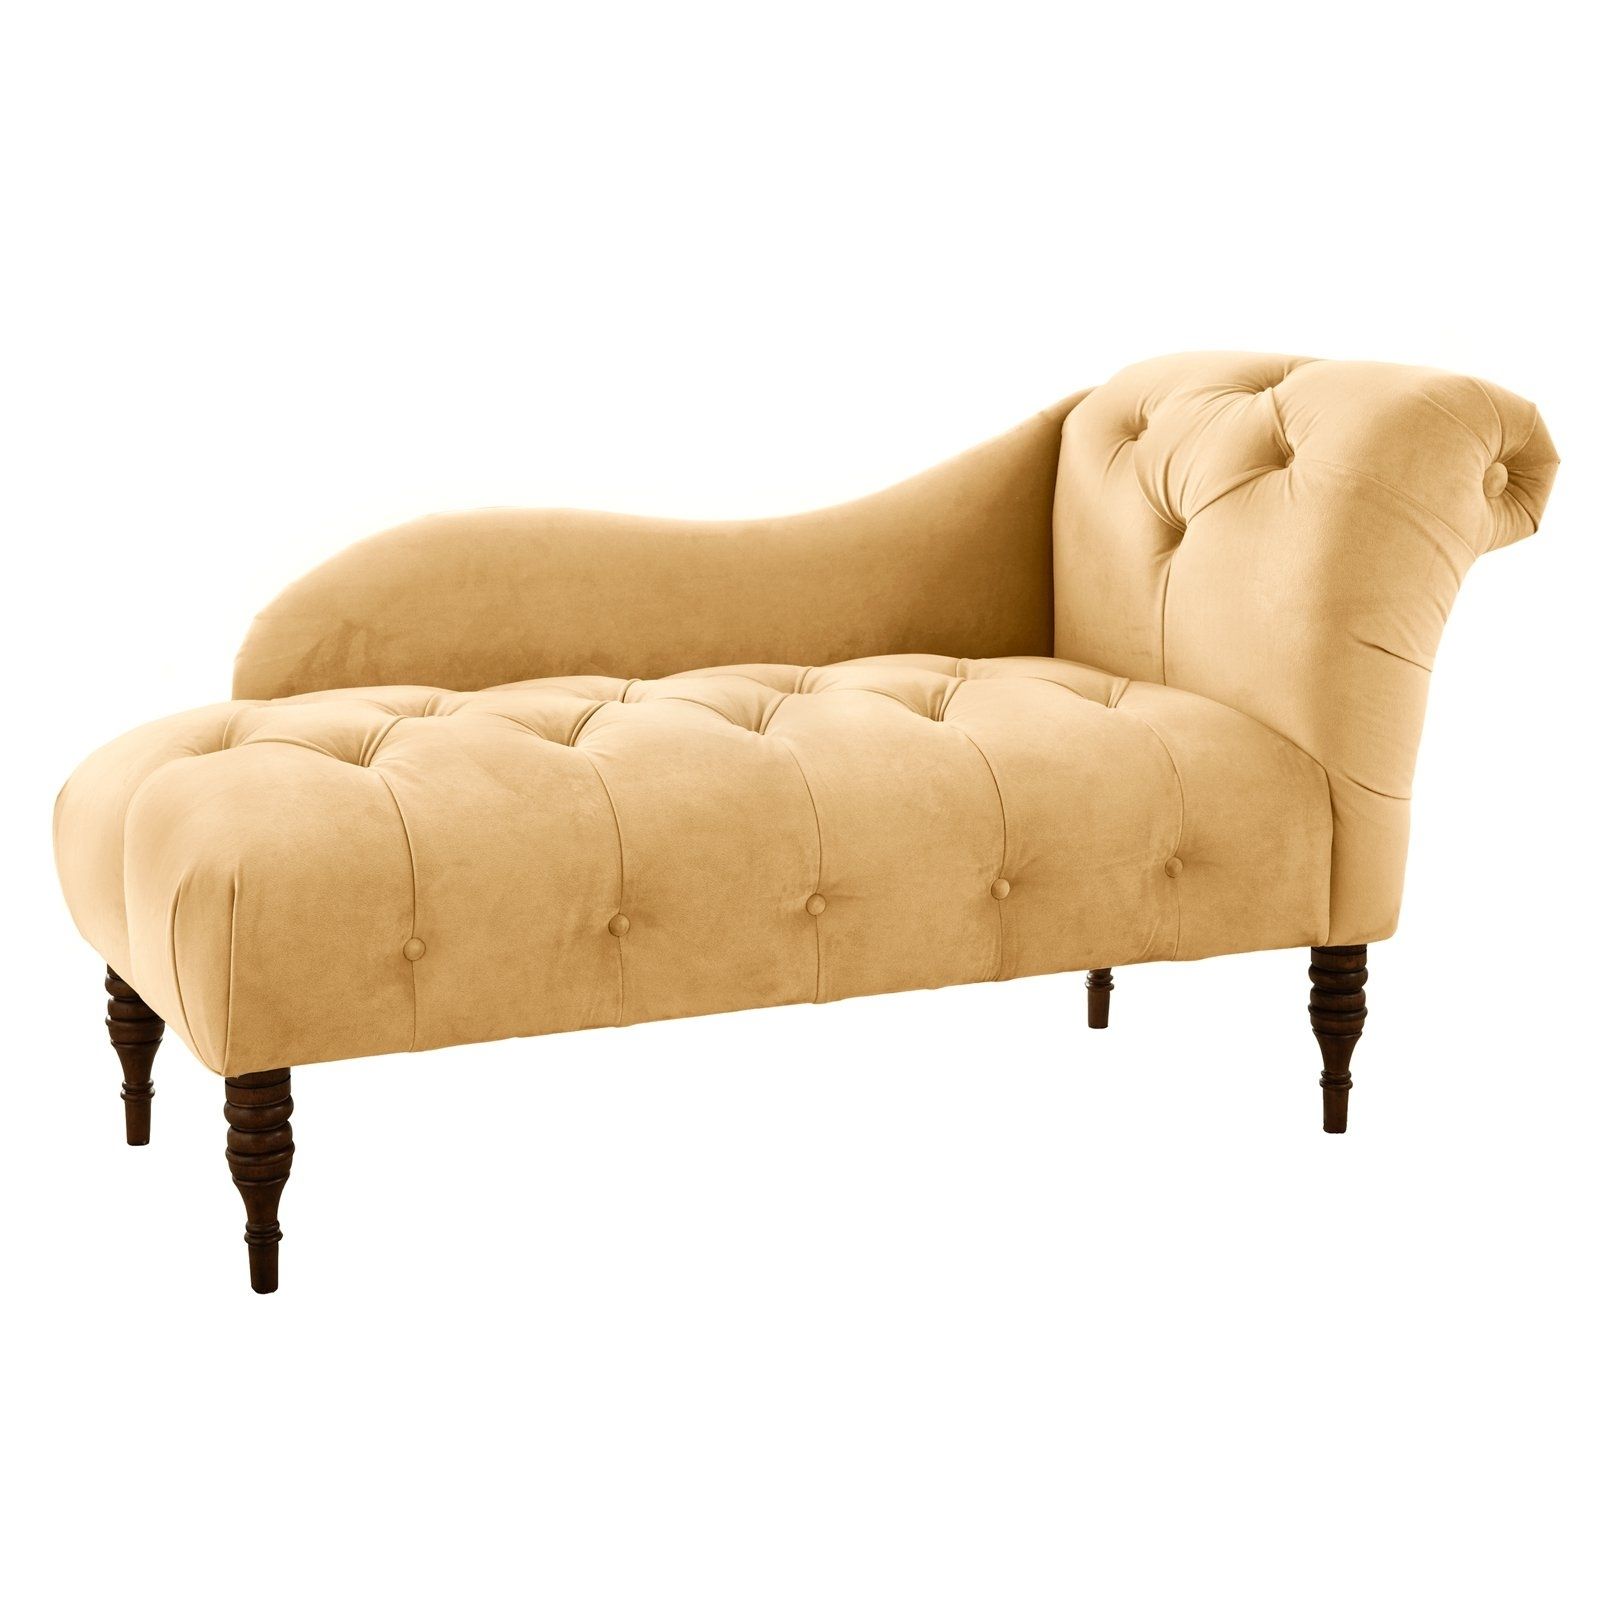 Popular Gold Chaise Lounges Regarding Madison Tufted Chaise Lounge (View 3 of 15)